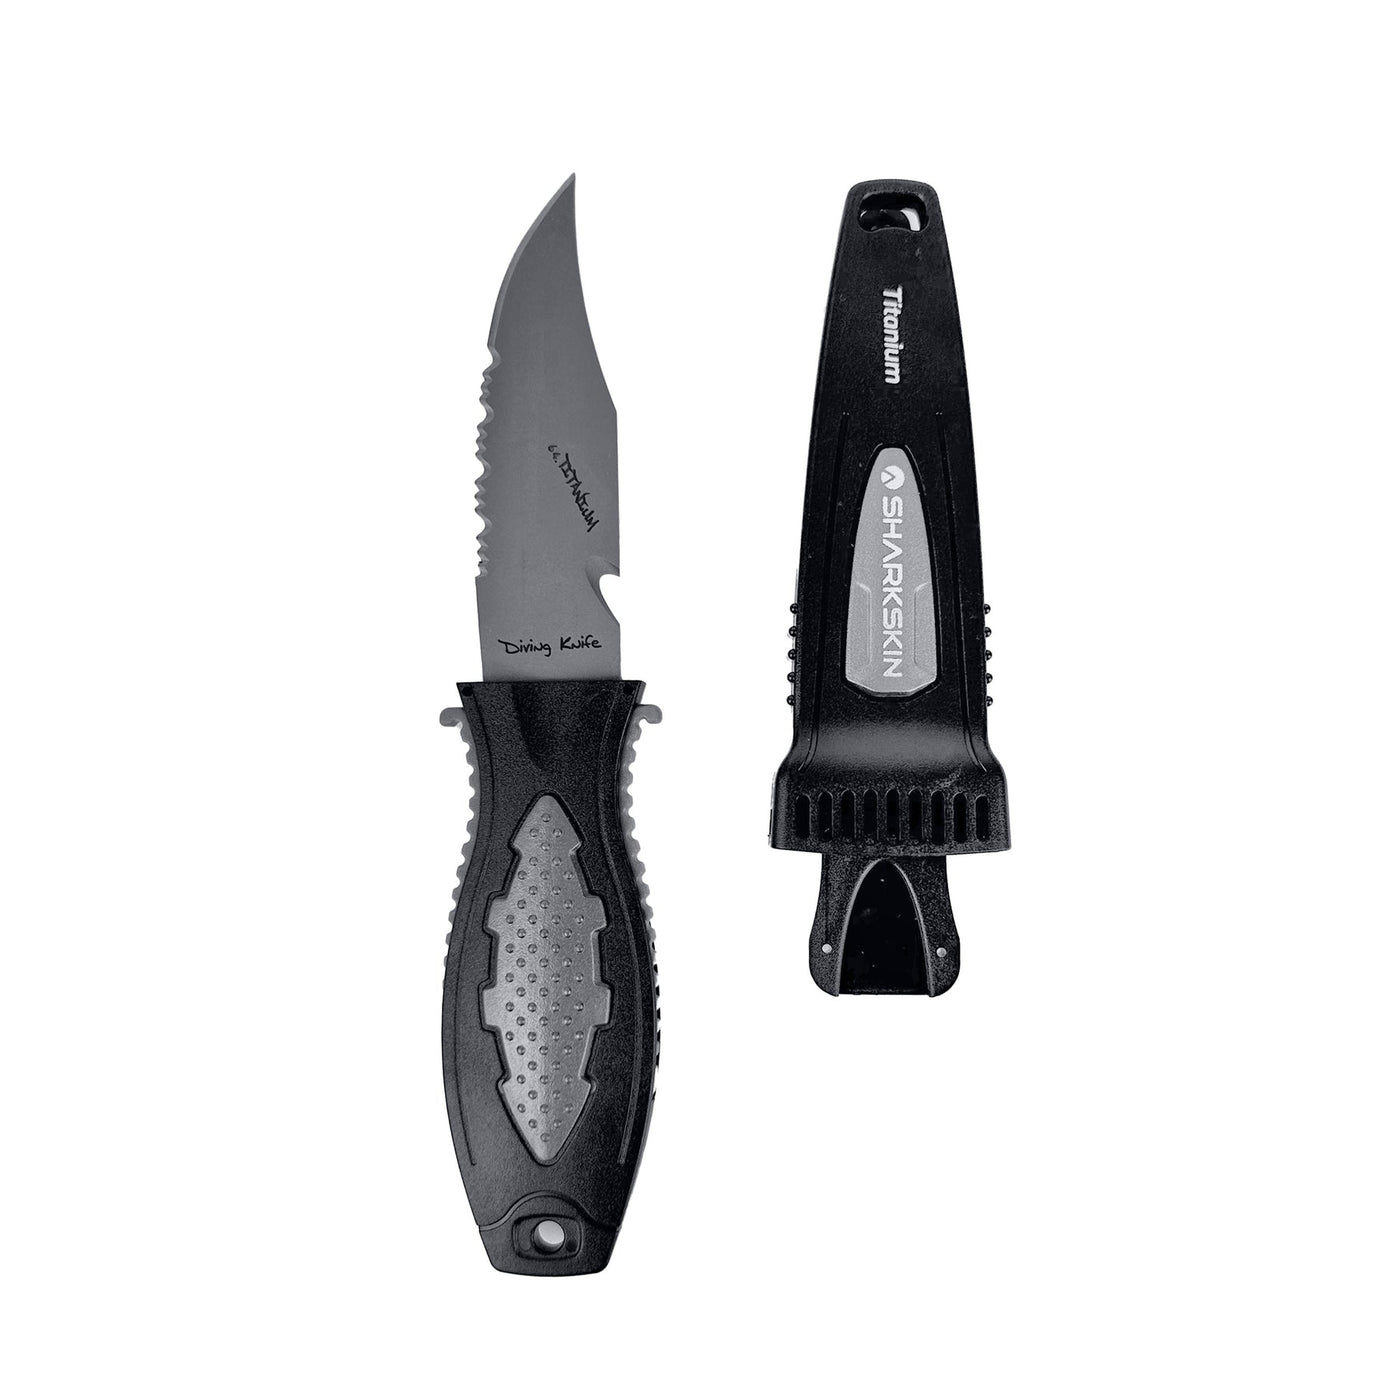 Sharkskin Titanium Knife Small With Press Quick Release Lock Sheath, BCD & Hose Mount